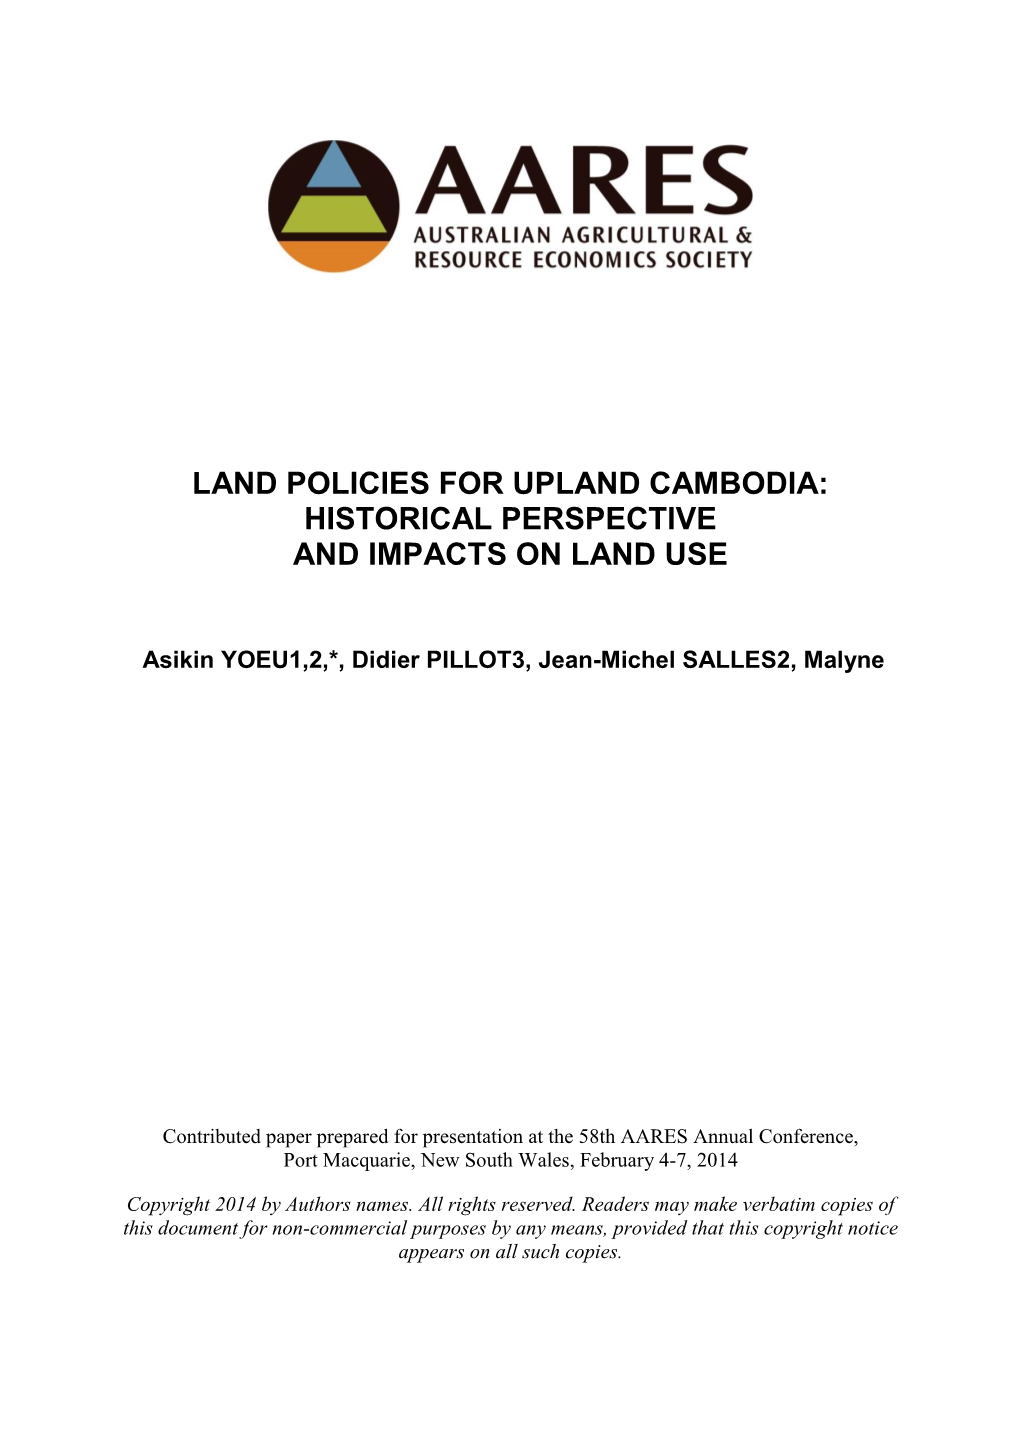 Land Policies for Upland Cambodia: Historical Perspective and Impacts on Land Use